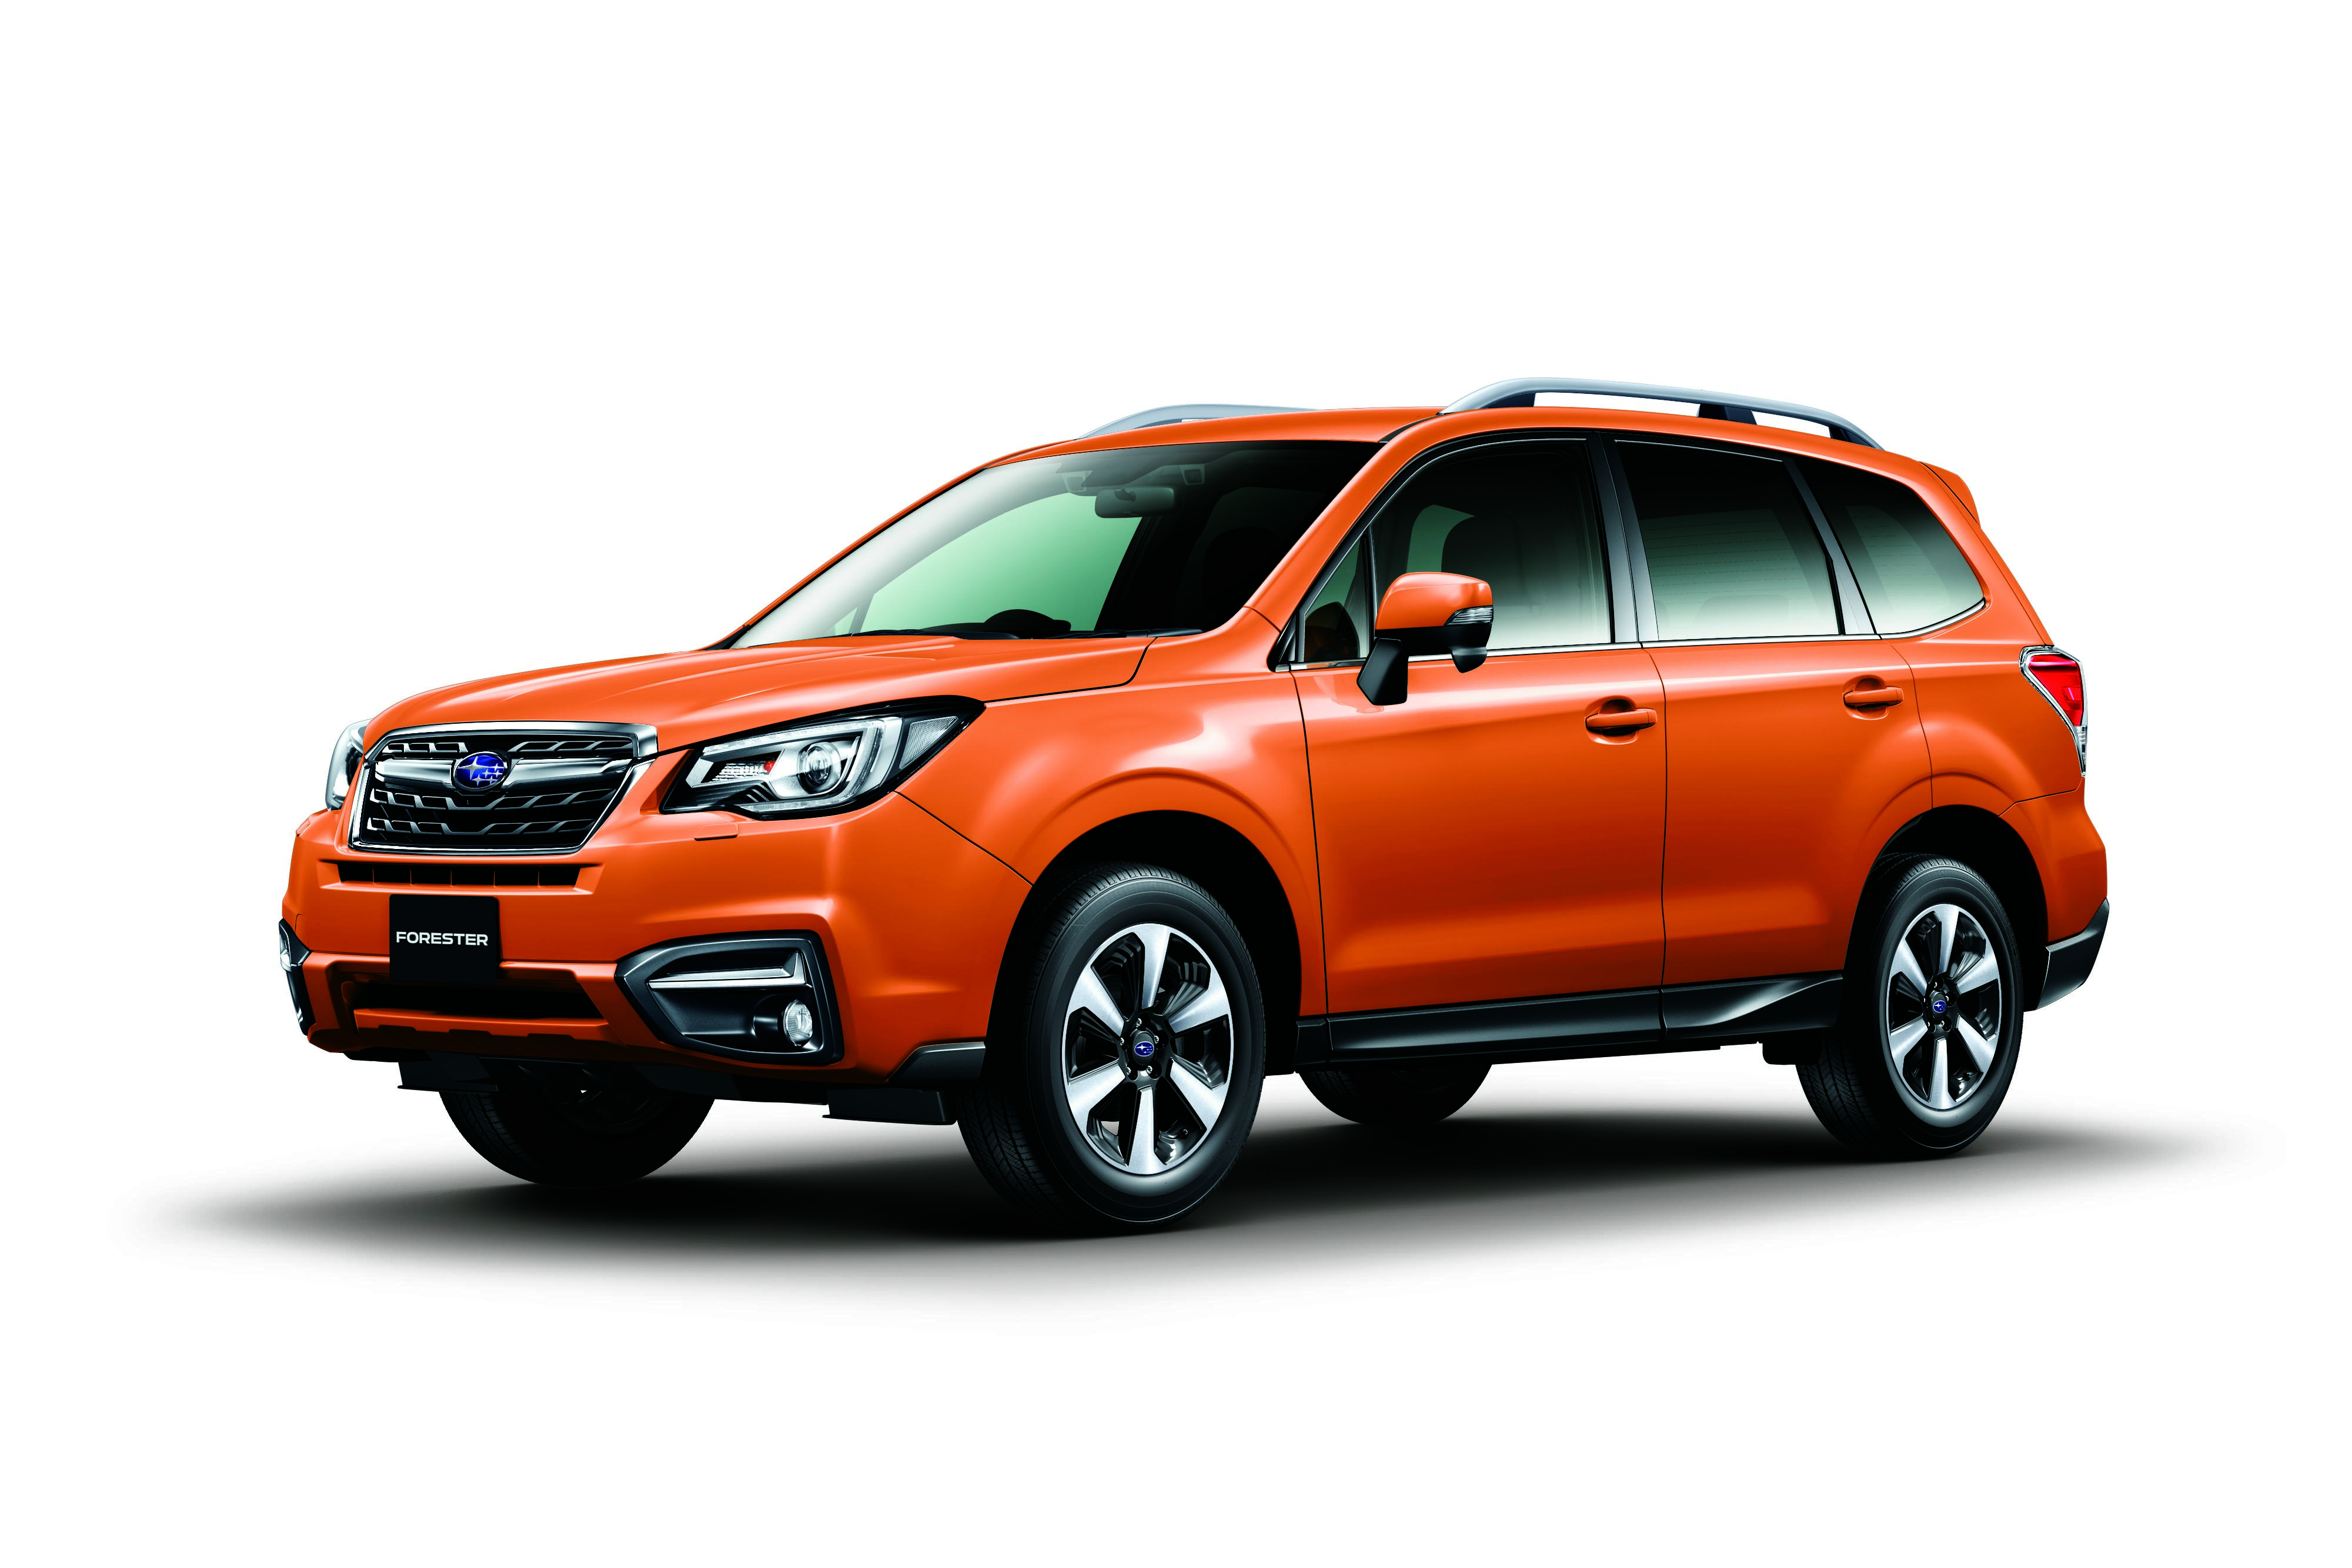 Subaru Forester accessories restyling